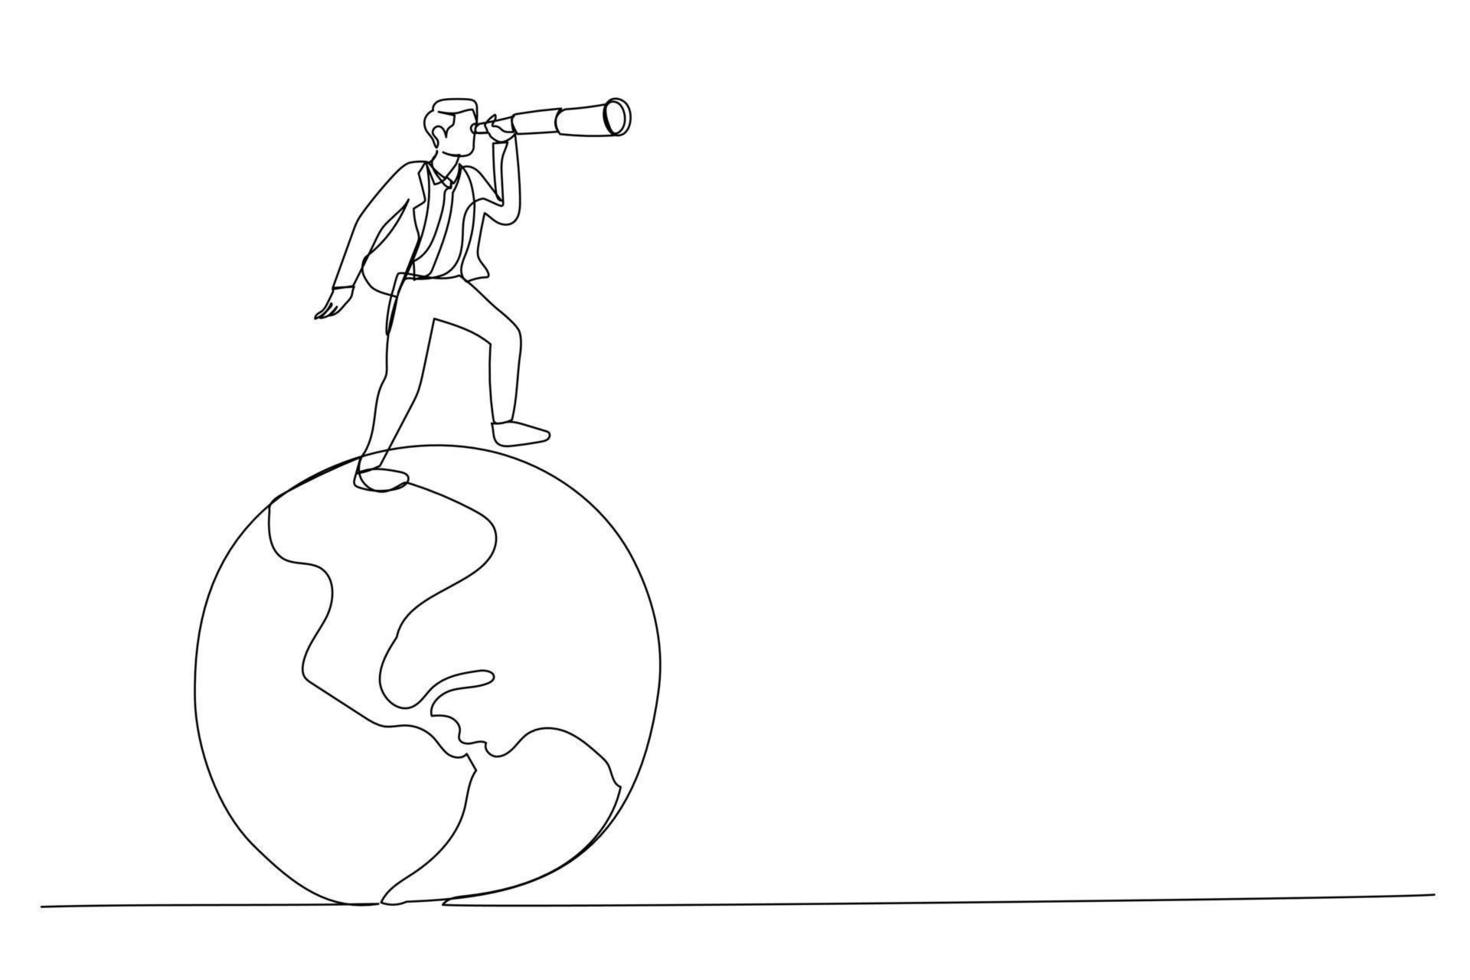 Illustration of businessman standing on planet earth globe using telescope search new opportunity. Globalization, global business vision. One line art style vector